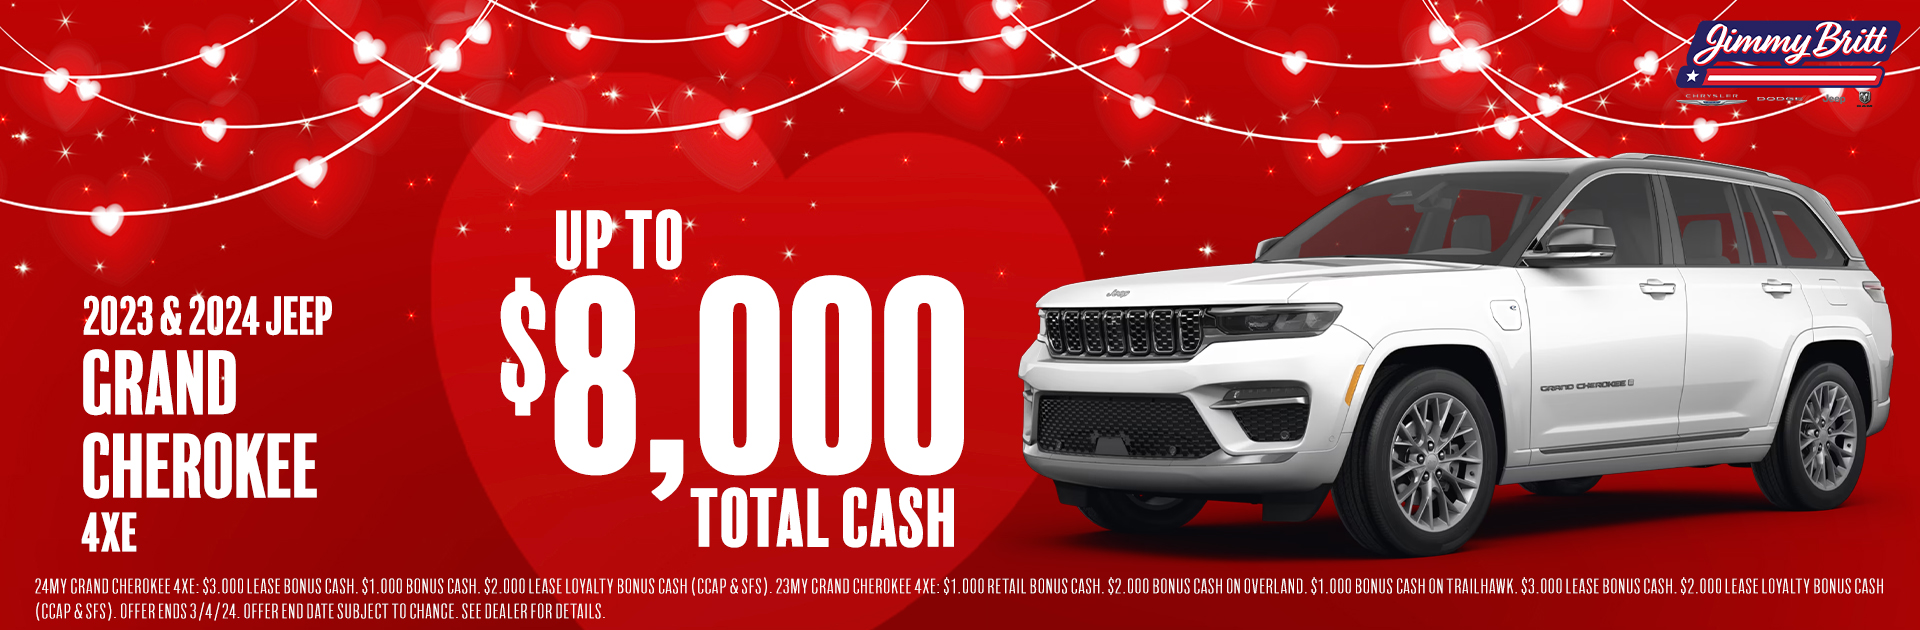 2023 & 2024 Jeep Grand Cherokee 4XE: Up to $8,000 total cash!